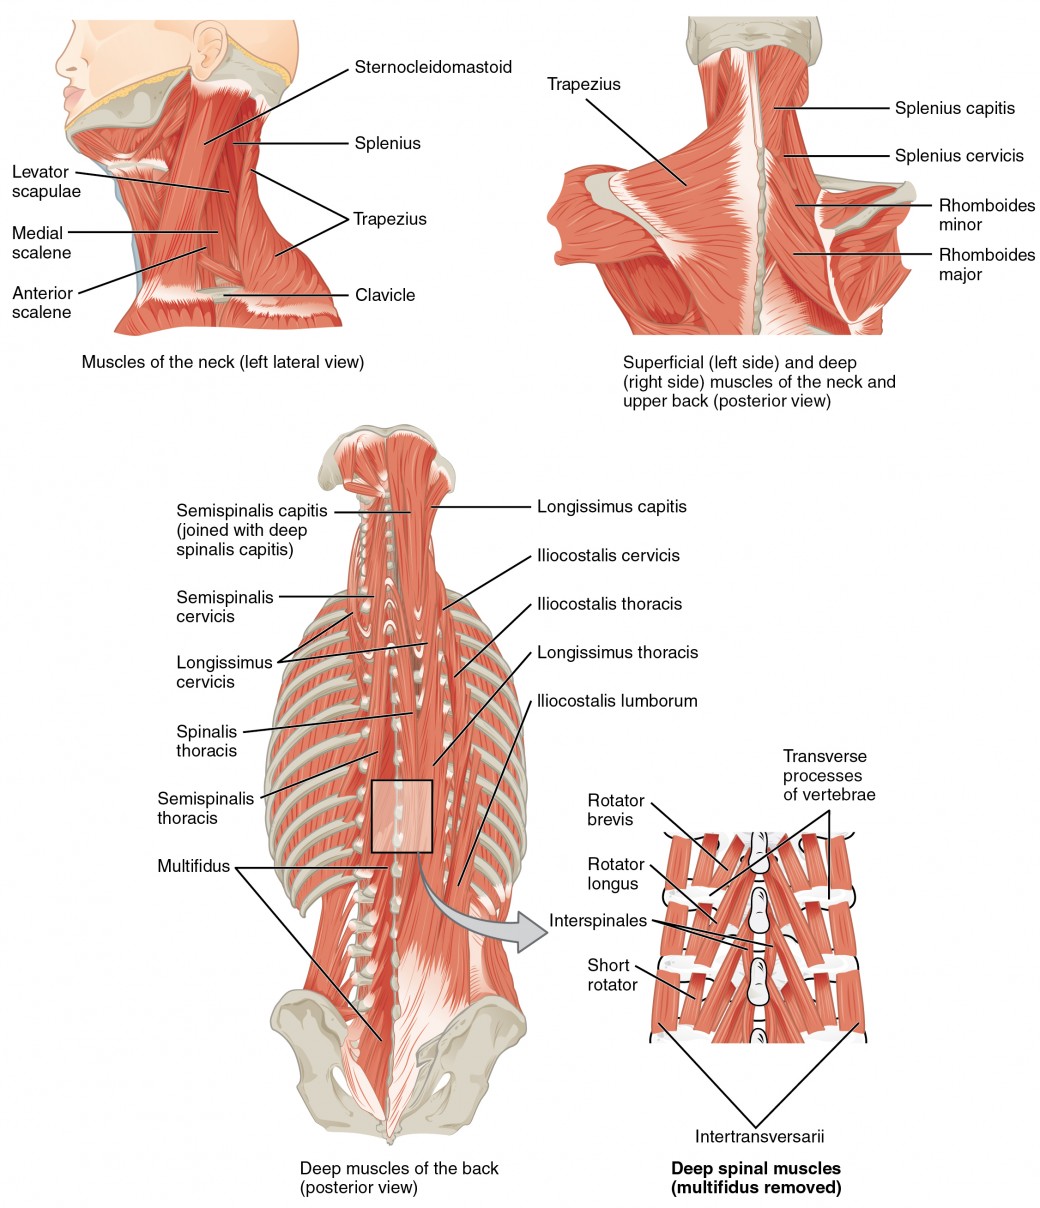 The top left panel shows a lateral view of the muscles of the neck, and the bottom left panel shows the posterior view of the superficial and deep muscles of the neck. The center panel shows the deep muscles of the back, and the right panel shows the deep spinal muscles.